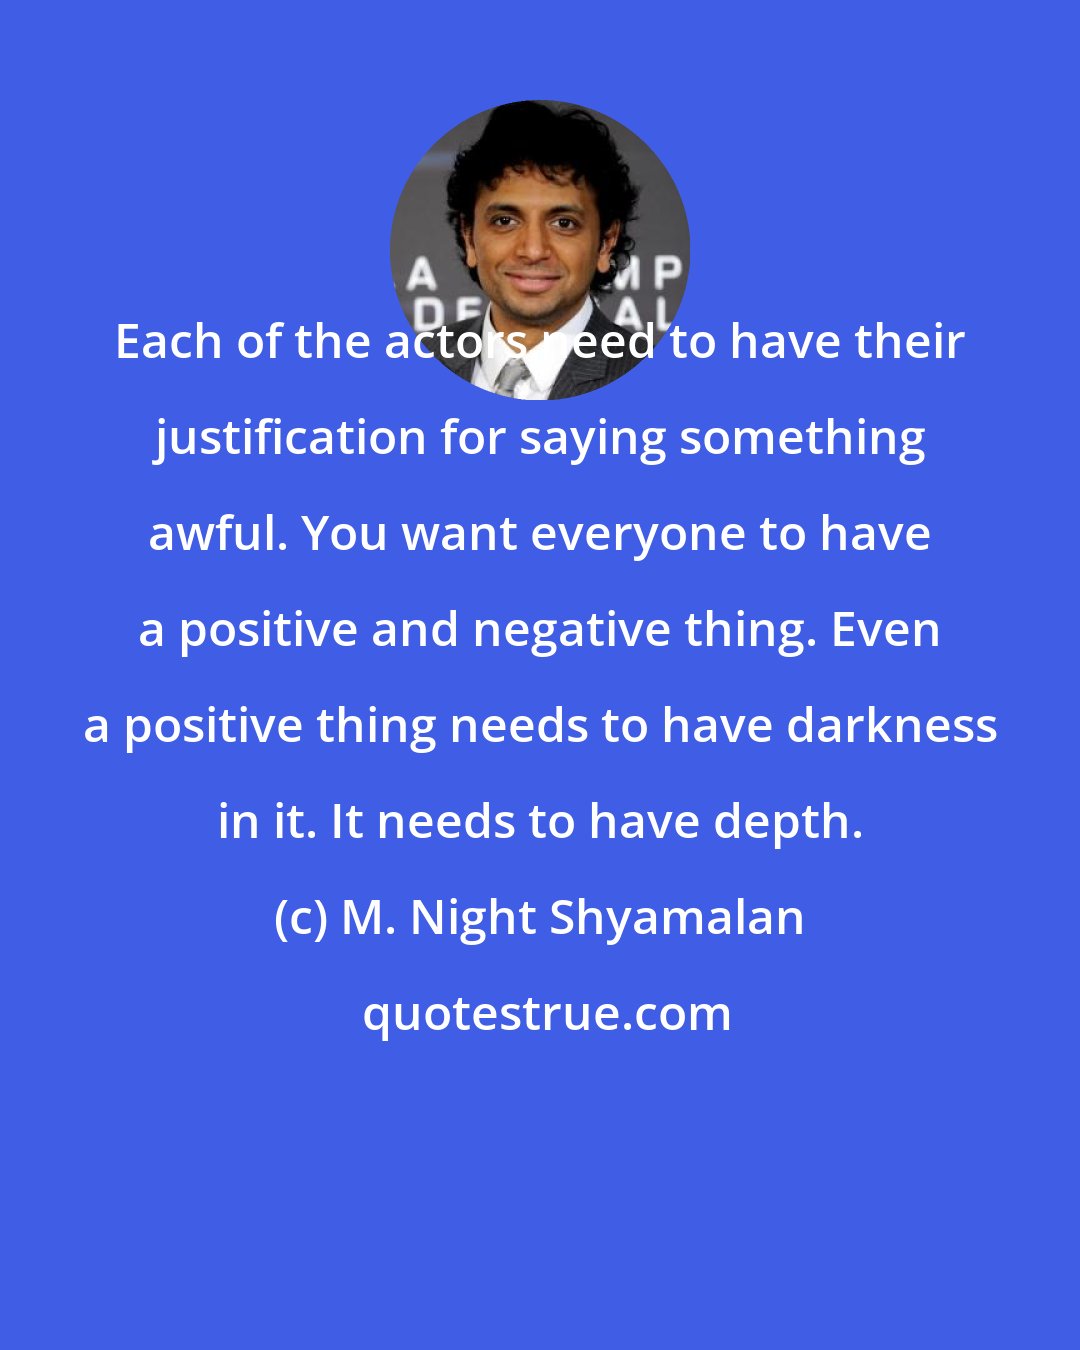 M. Night Shyamalan: Each of the actors need to have their justification for saying something awful. You want everyone to have a positive and negative thing. Even a positive thing needs to have darkness in it. It needs to have depth.